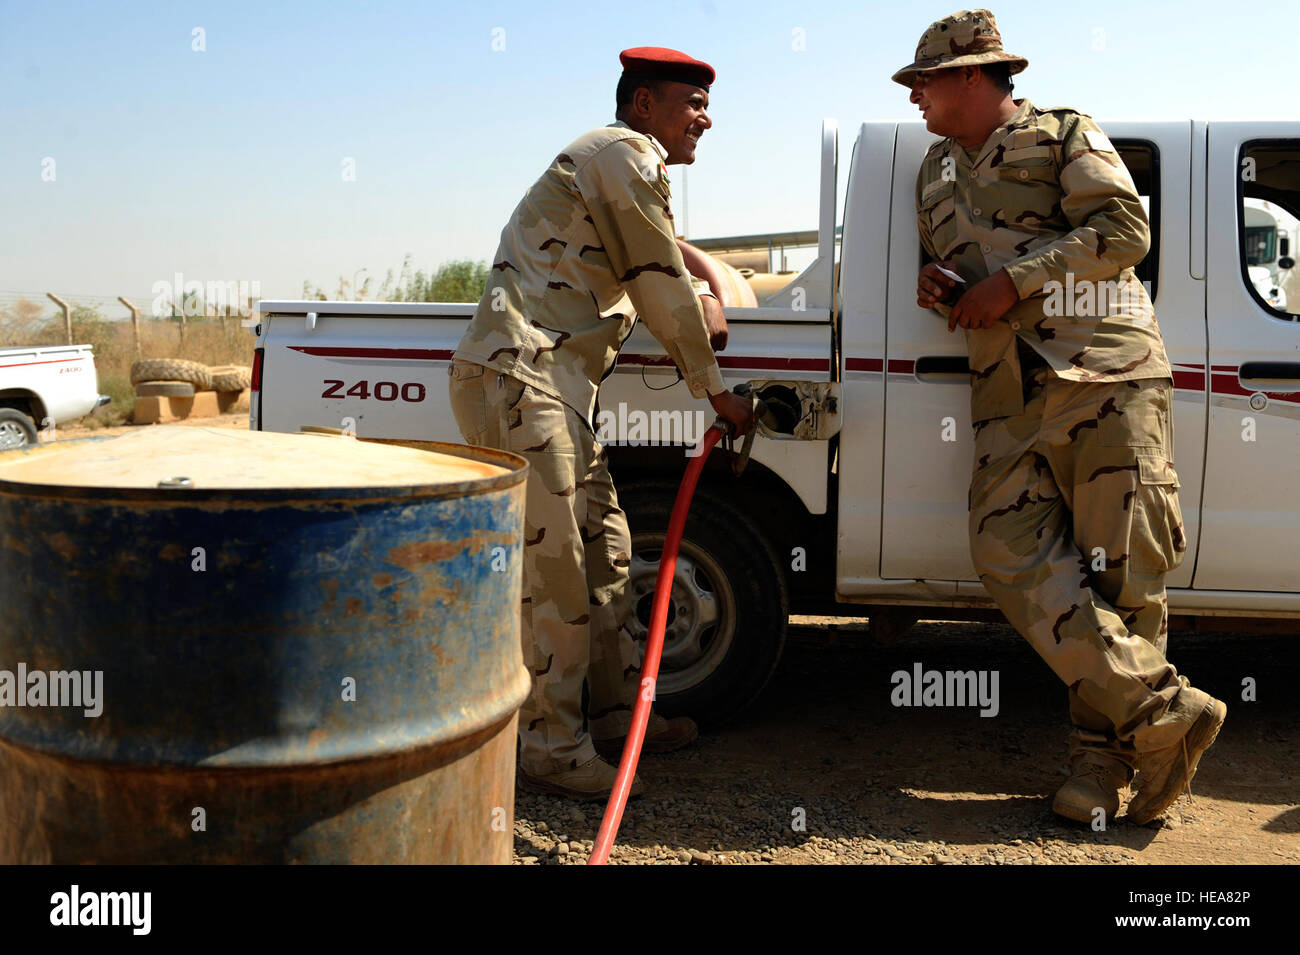 Iraqi soldiers refuel a vehicle at Camp Taji, near Baghdad, Iraq, July 11. The Iraqi fuels depot is run exclusively by the Iraqi army with some assistance from an American Airman assigned to the Logistics Military Advisor Team. Stock Photo